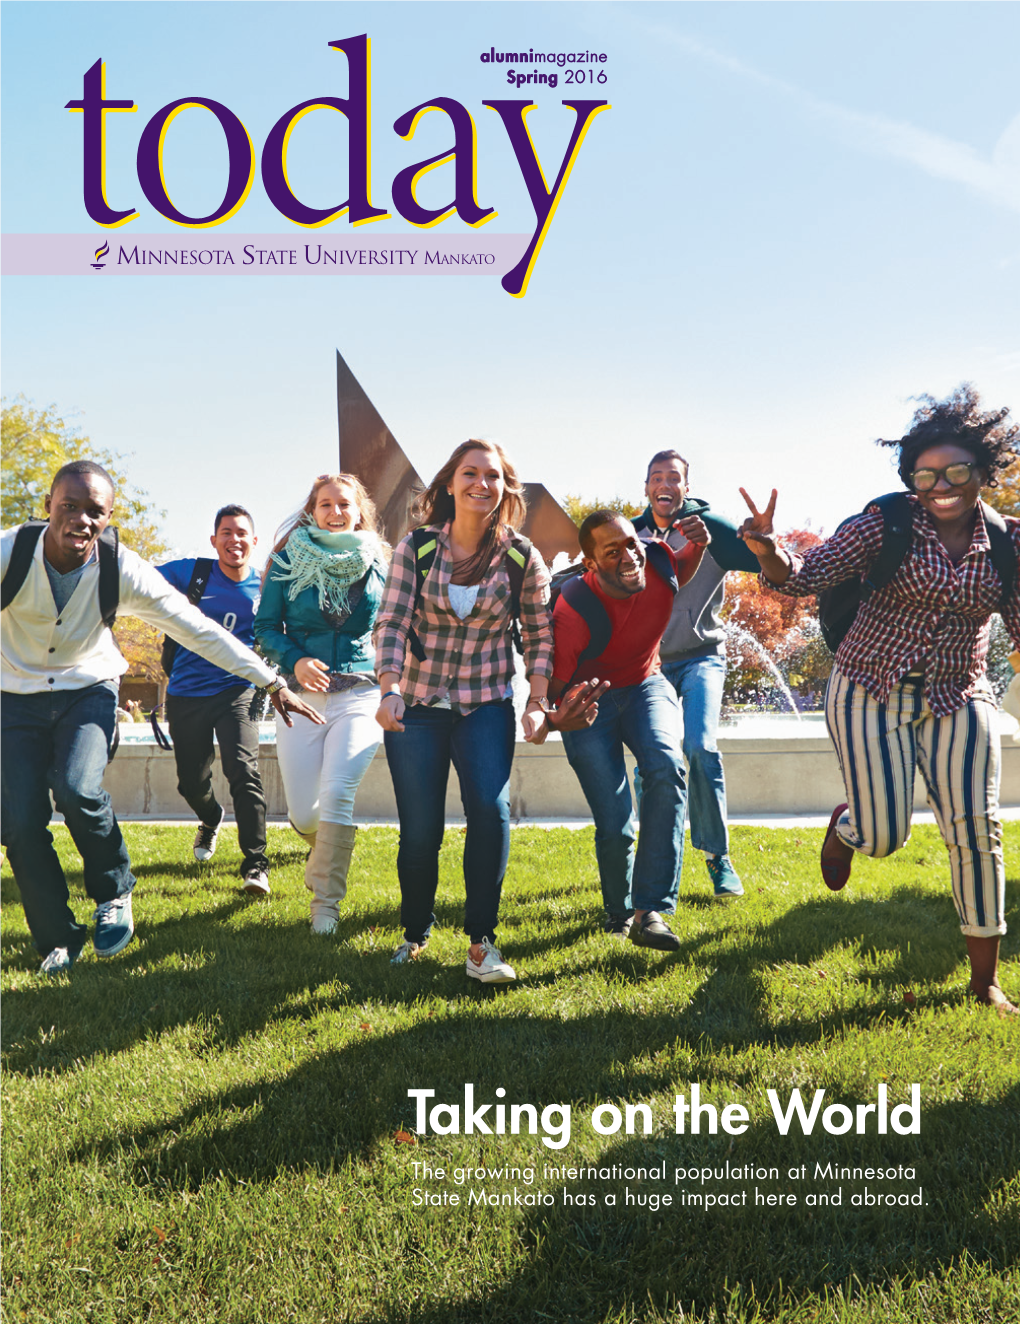 Taking on the World the Growing International Population at Minnesota State Mankato Has a Huge Impact Here and Abroad